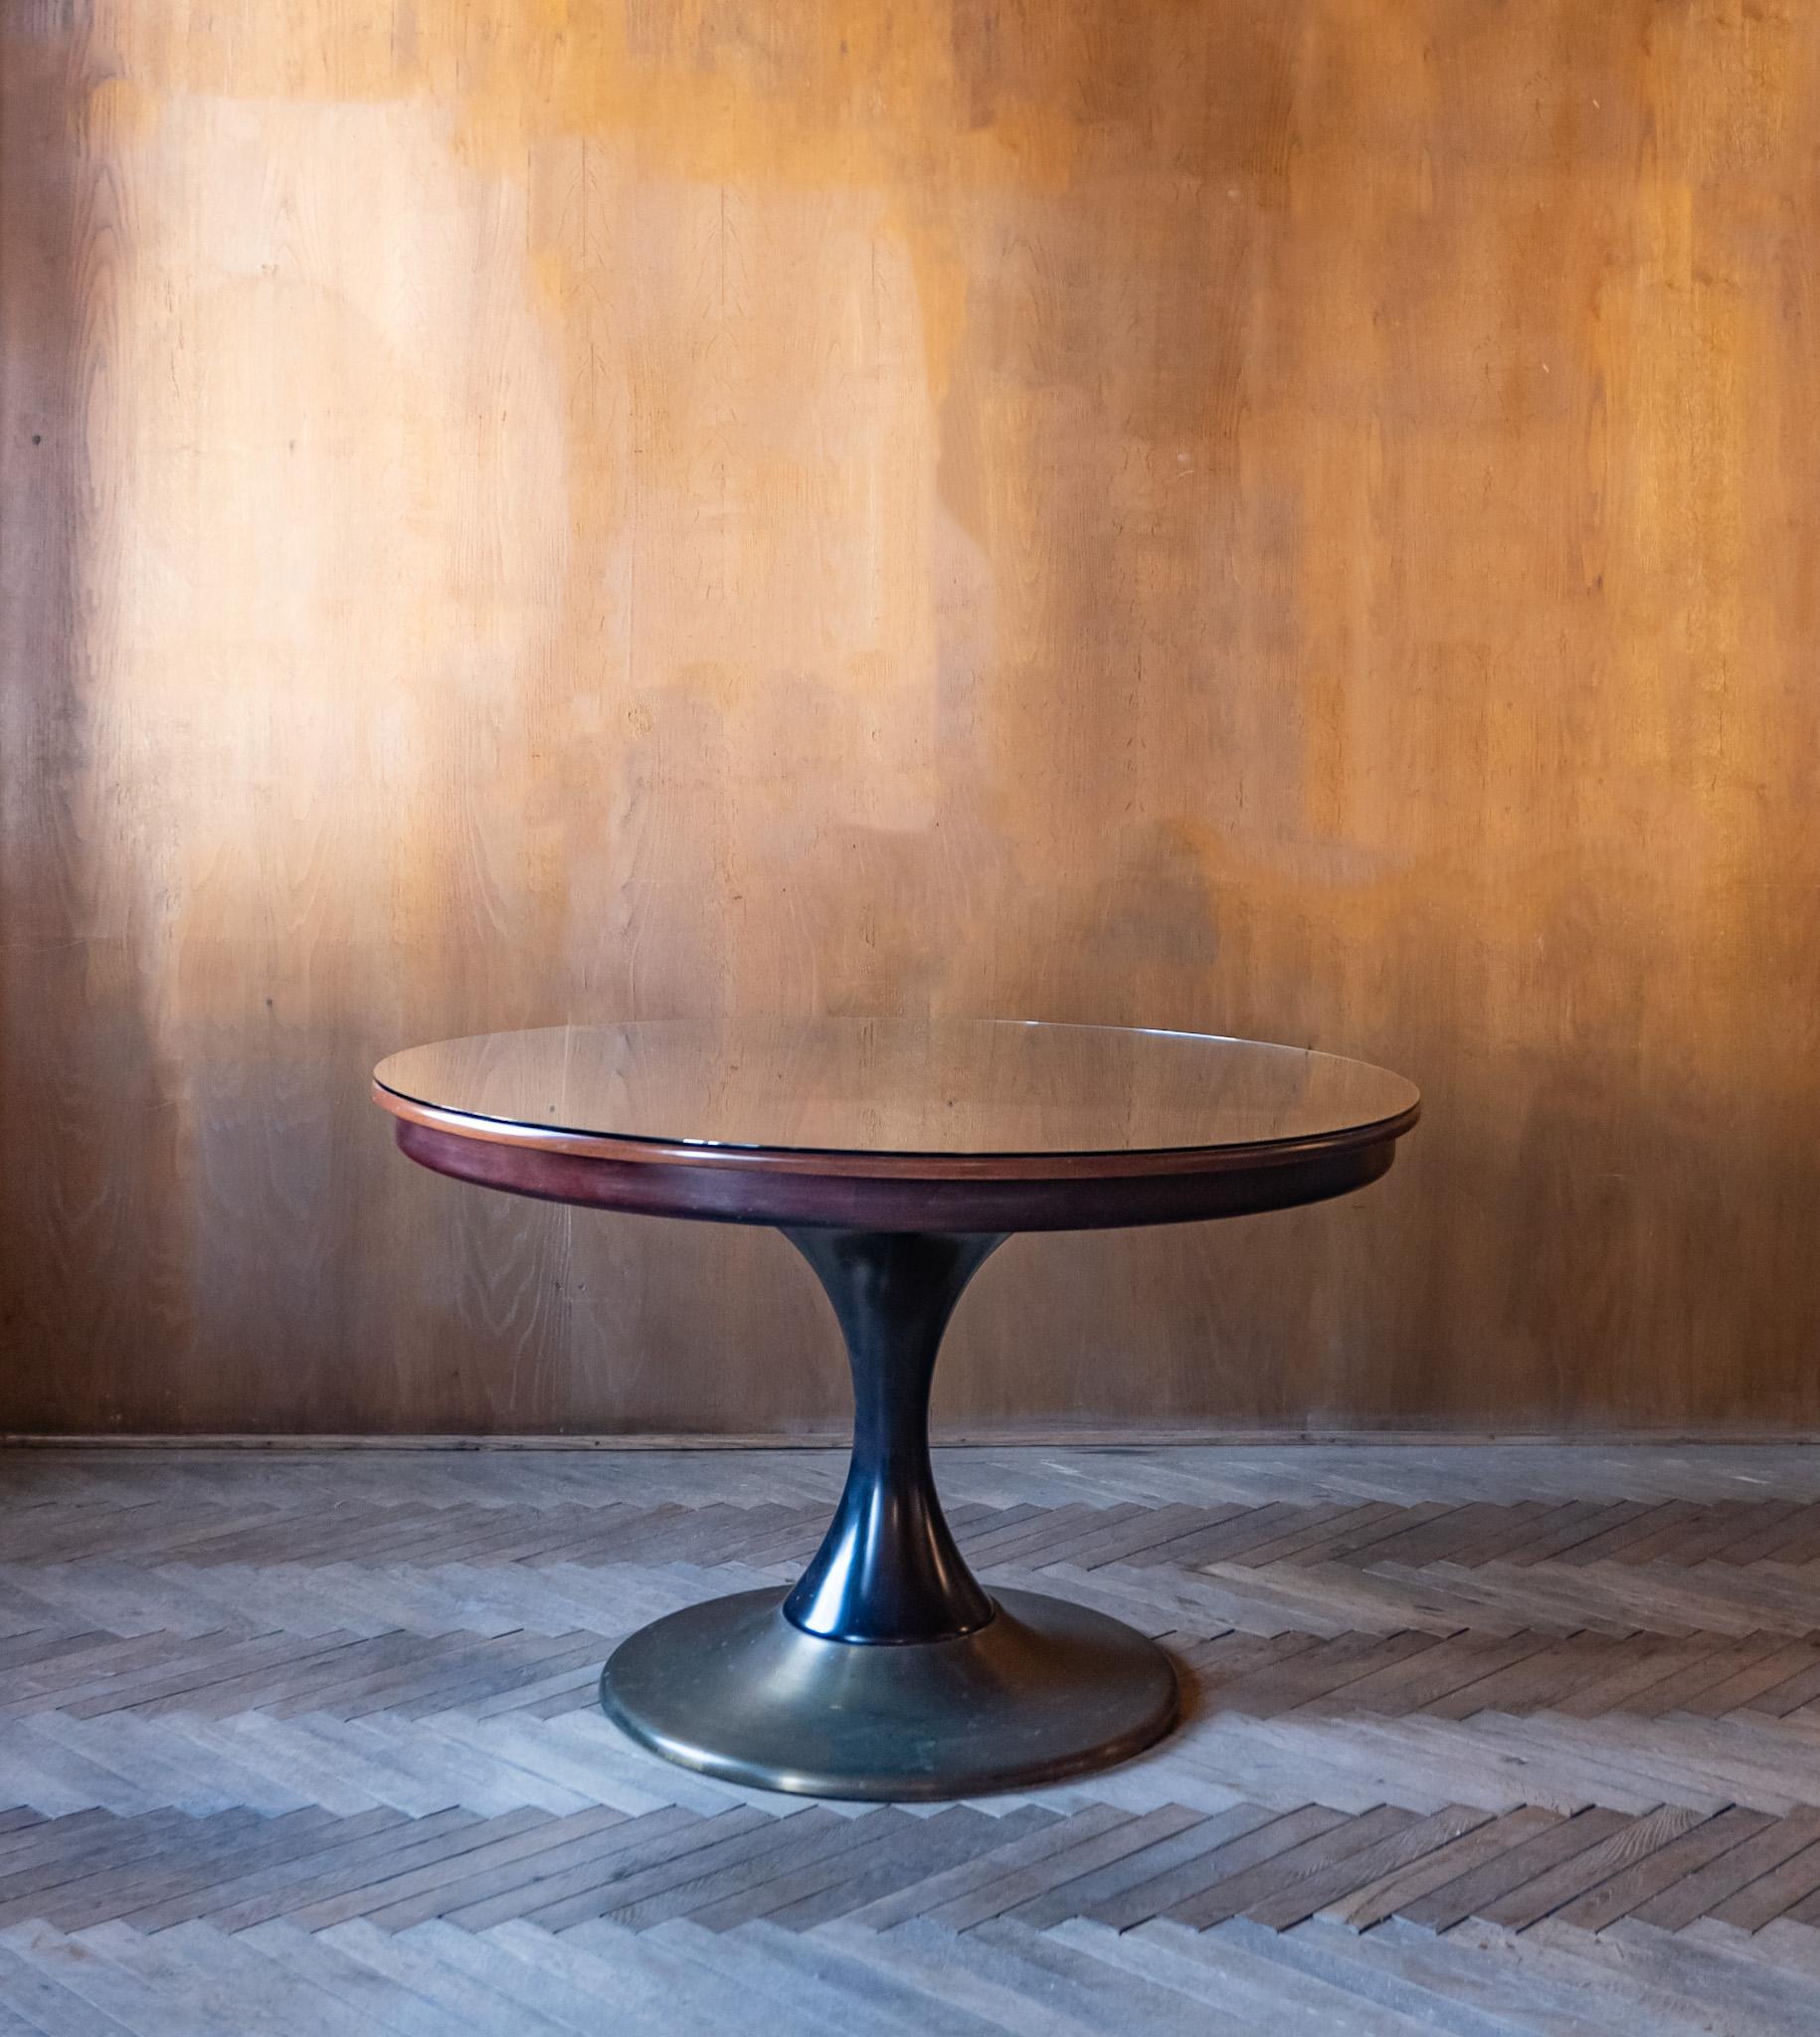 Mid-century Modern round wooden brass dining table, Italy 1950s.

This elegant Italian dining table in wonderful brown tones. consists of a table top and table base in walnut and brass. The wooden table top is additionally protected by a glass top